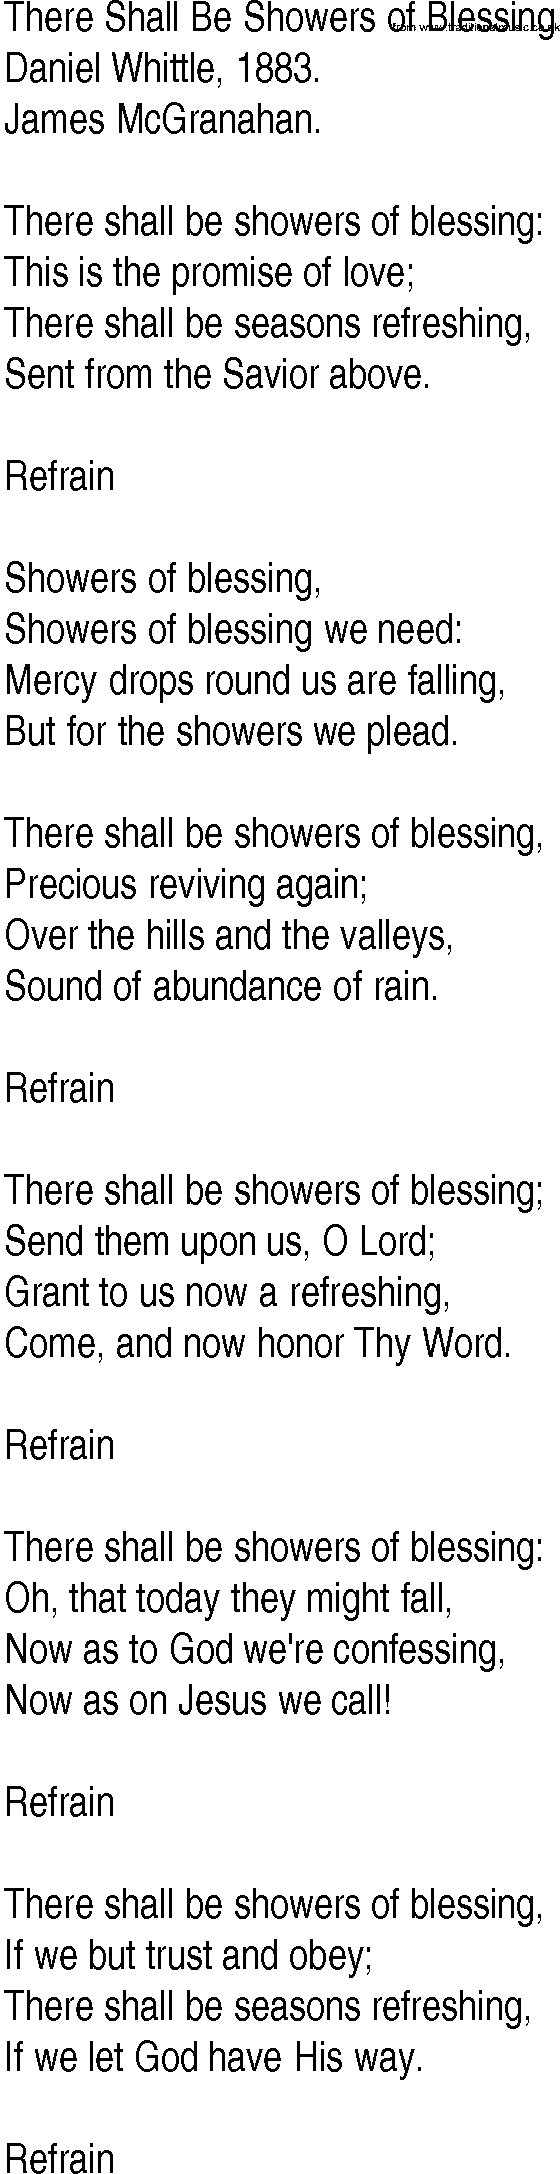 Hymn and Gospel Song: There Shall Be Showers of Blessing by Daniel Whittle lyrics